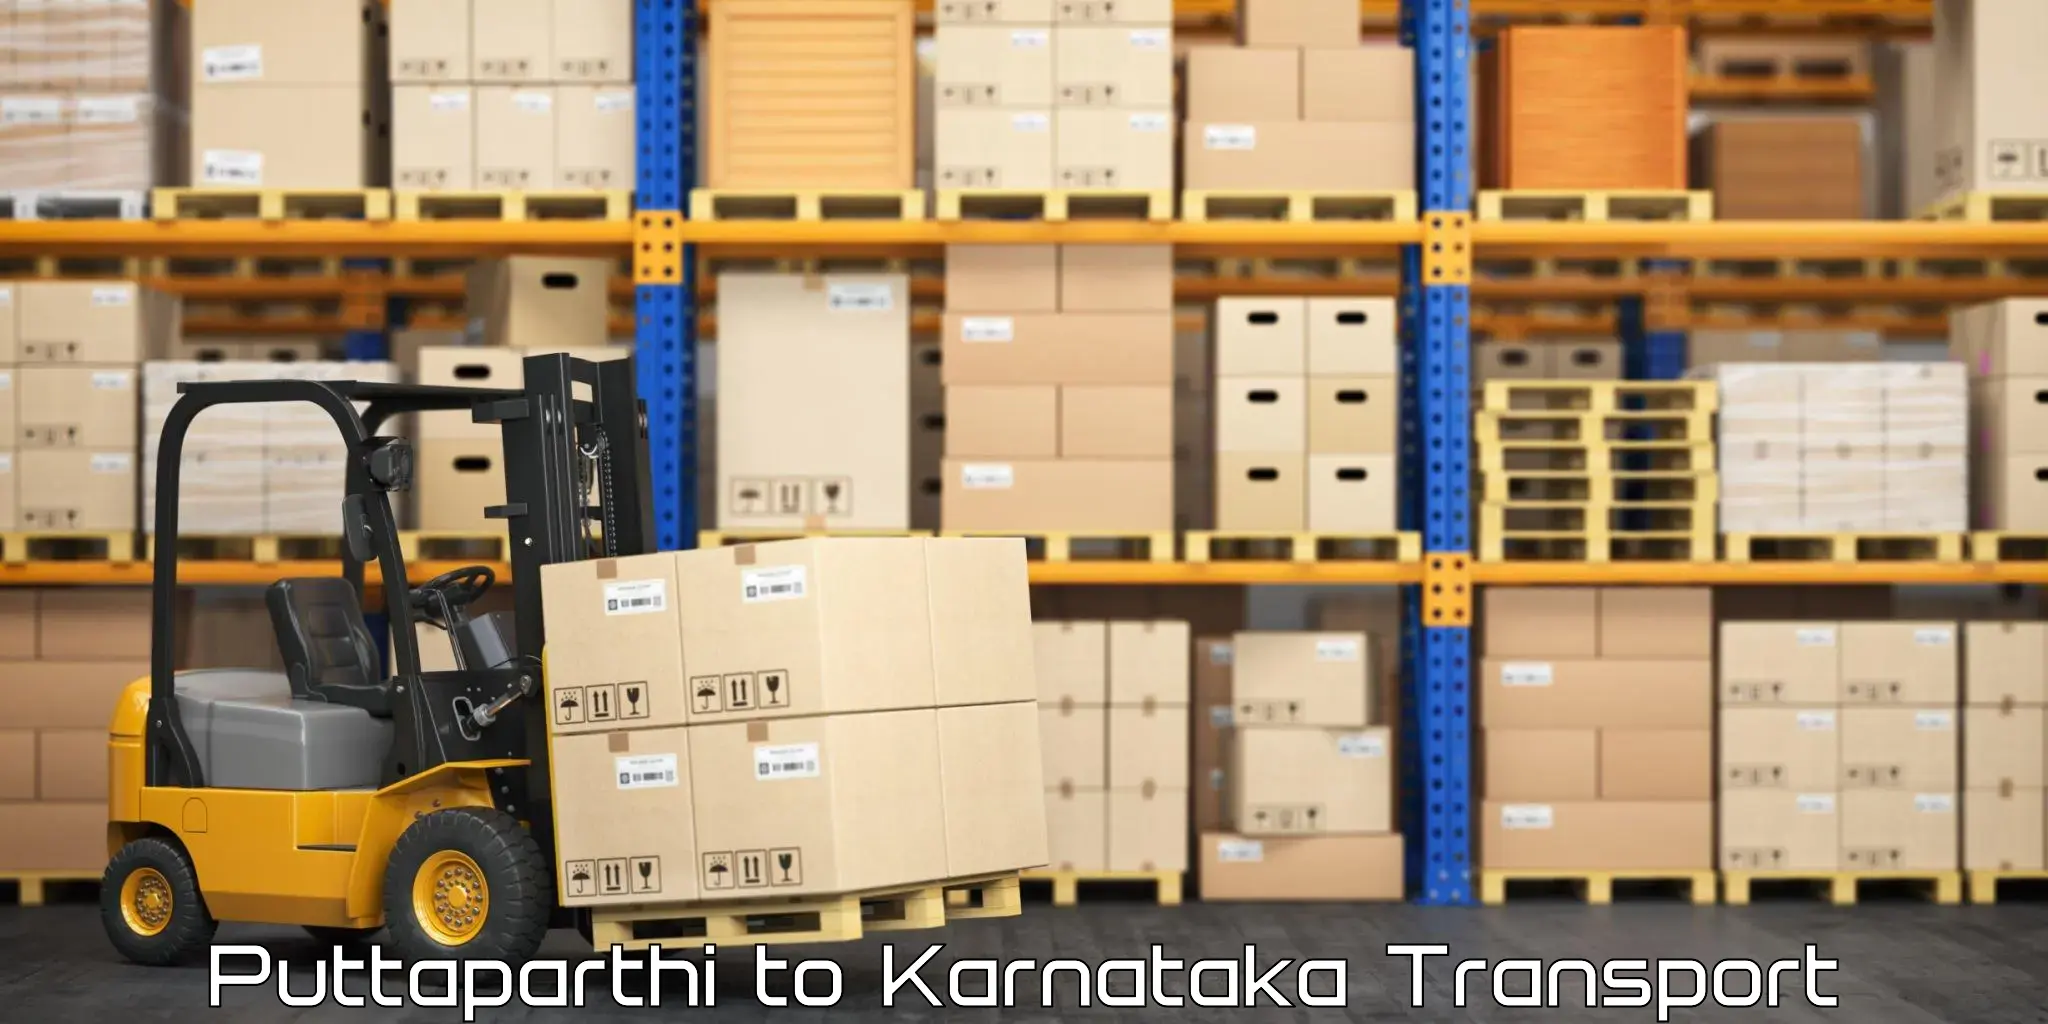 Truck transport companies in India in Puttaparthi to Manipal Academy of Higher Education